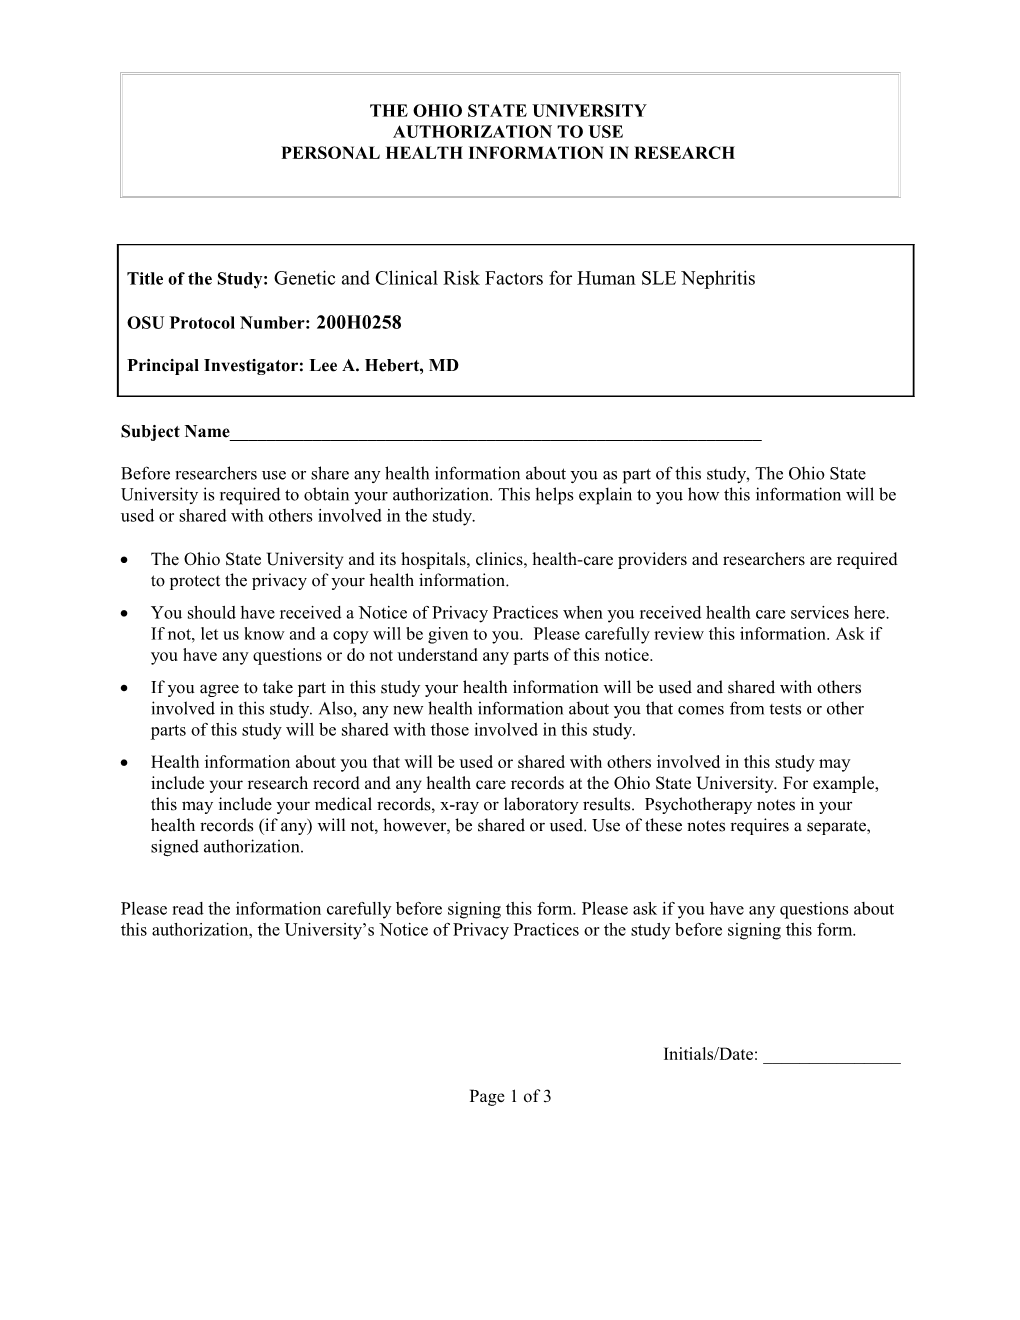 HIPAA Research Authorization Form